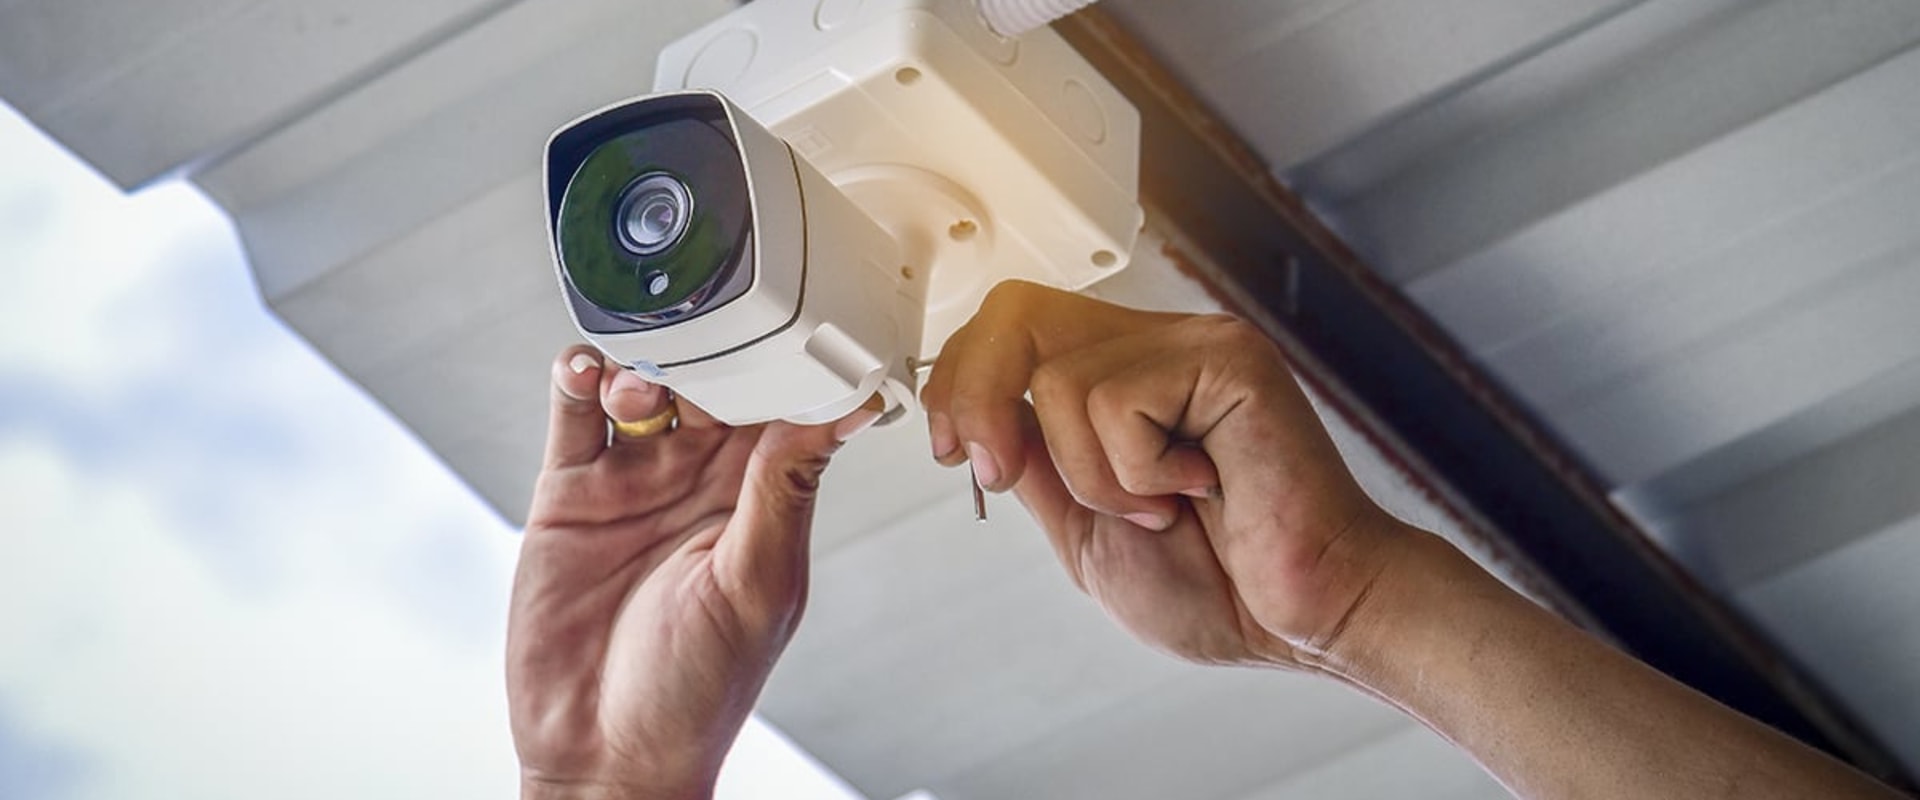 Securing Your Home with Outdoor Security Cameras